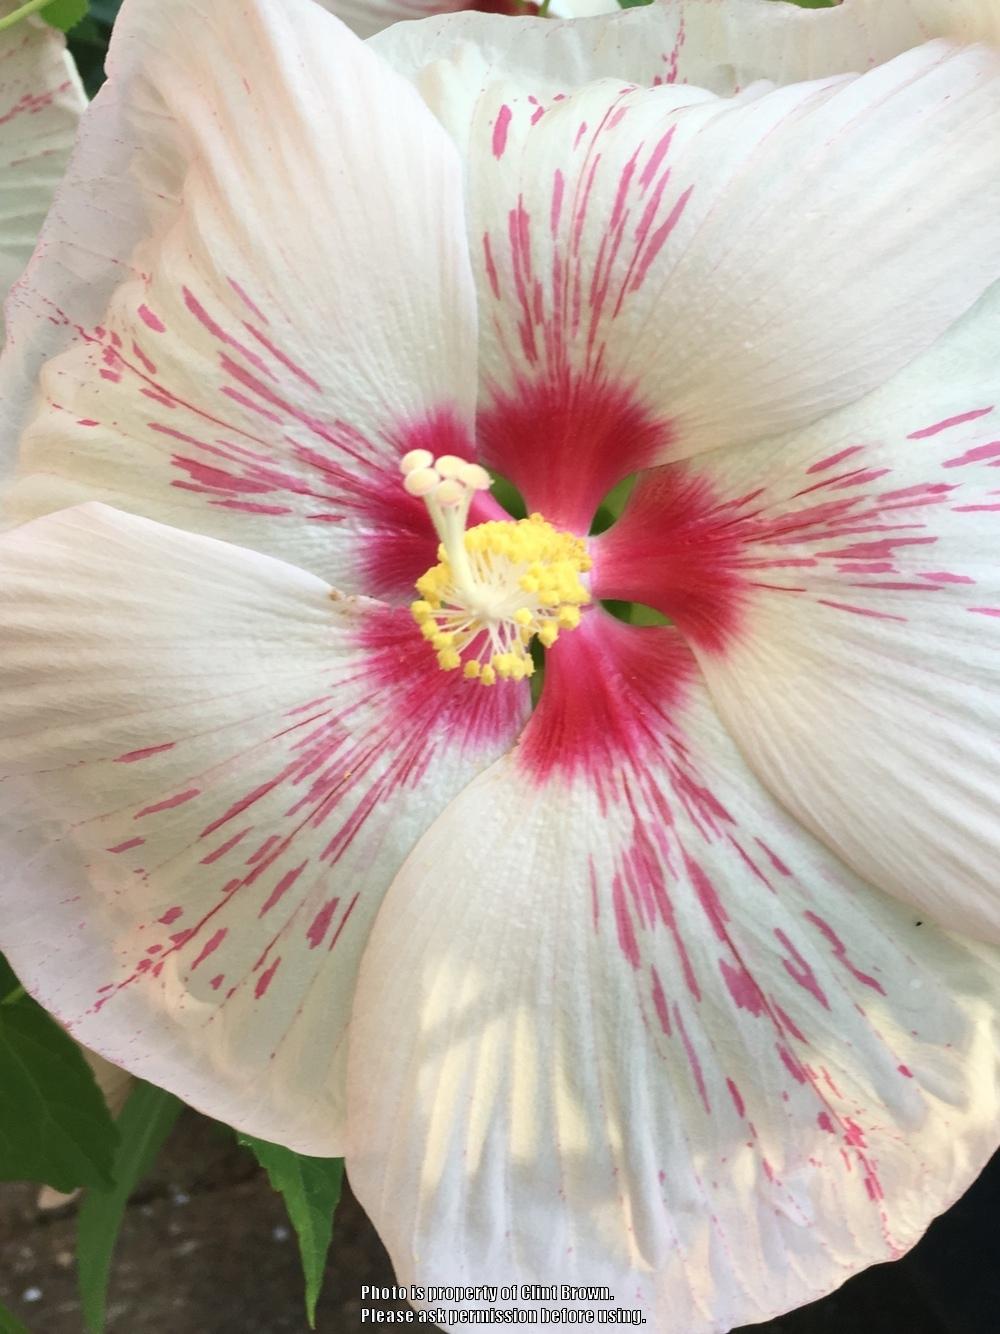 Photo of Hybrid Hardy Hibiscus (Hibiscus 'Peppermint Flare') uploaded by clintbrown